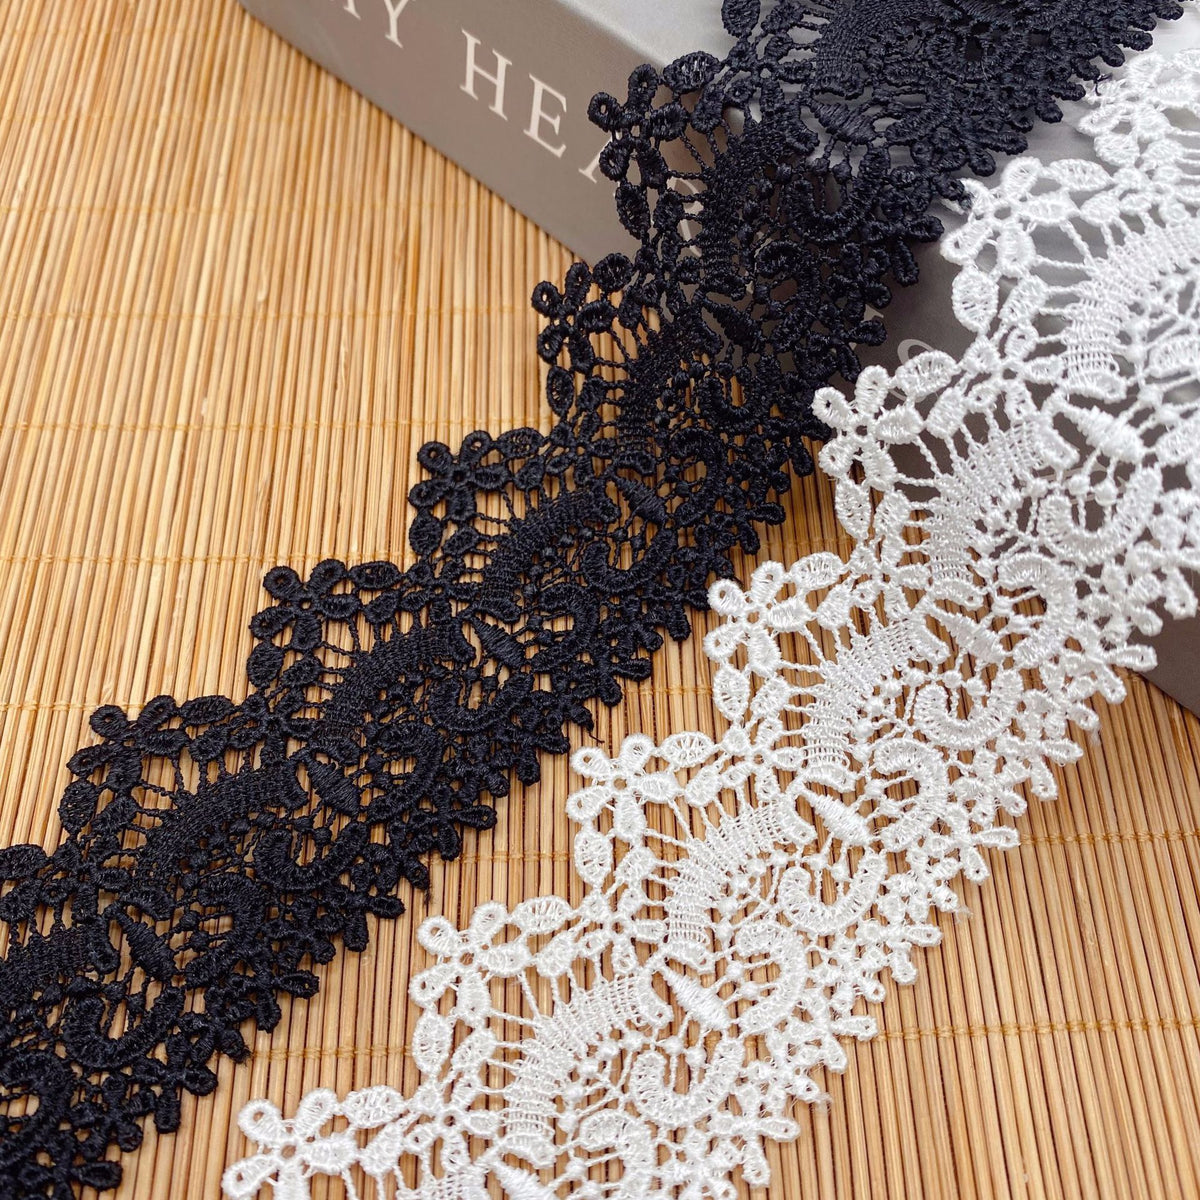 Lace Ribbon 14 Yards, Black Lace Trim, Vintage Cream Crochet Floral Lace  Fabric with 7 Patterns(2 Yards Each), Crafting Scalloped Edge for Sewing